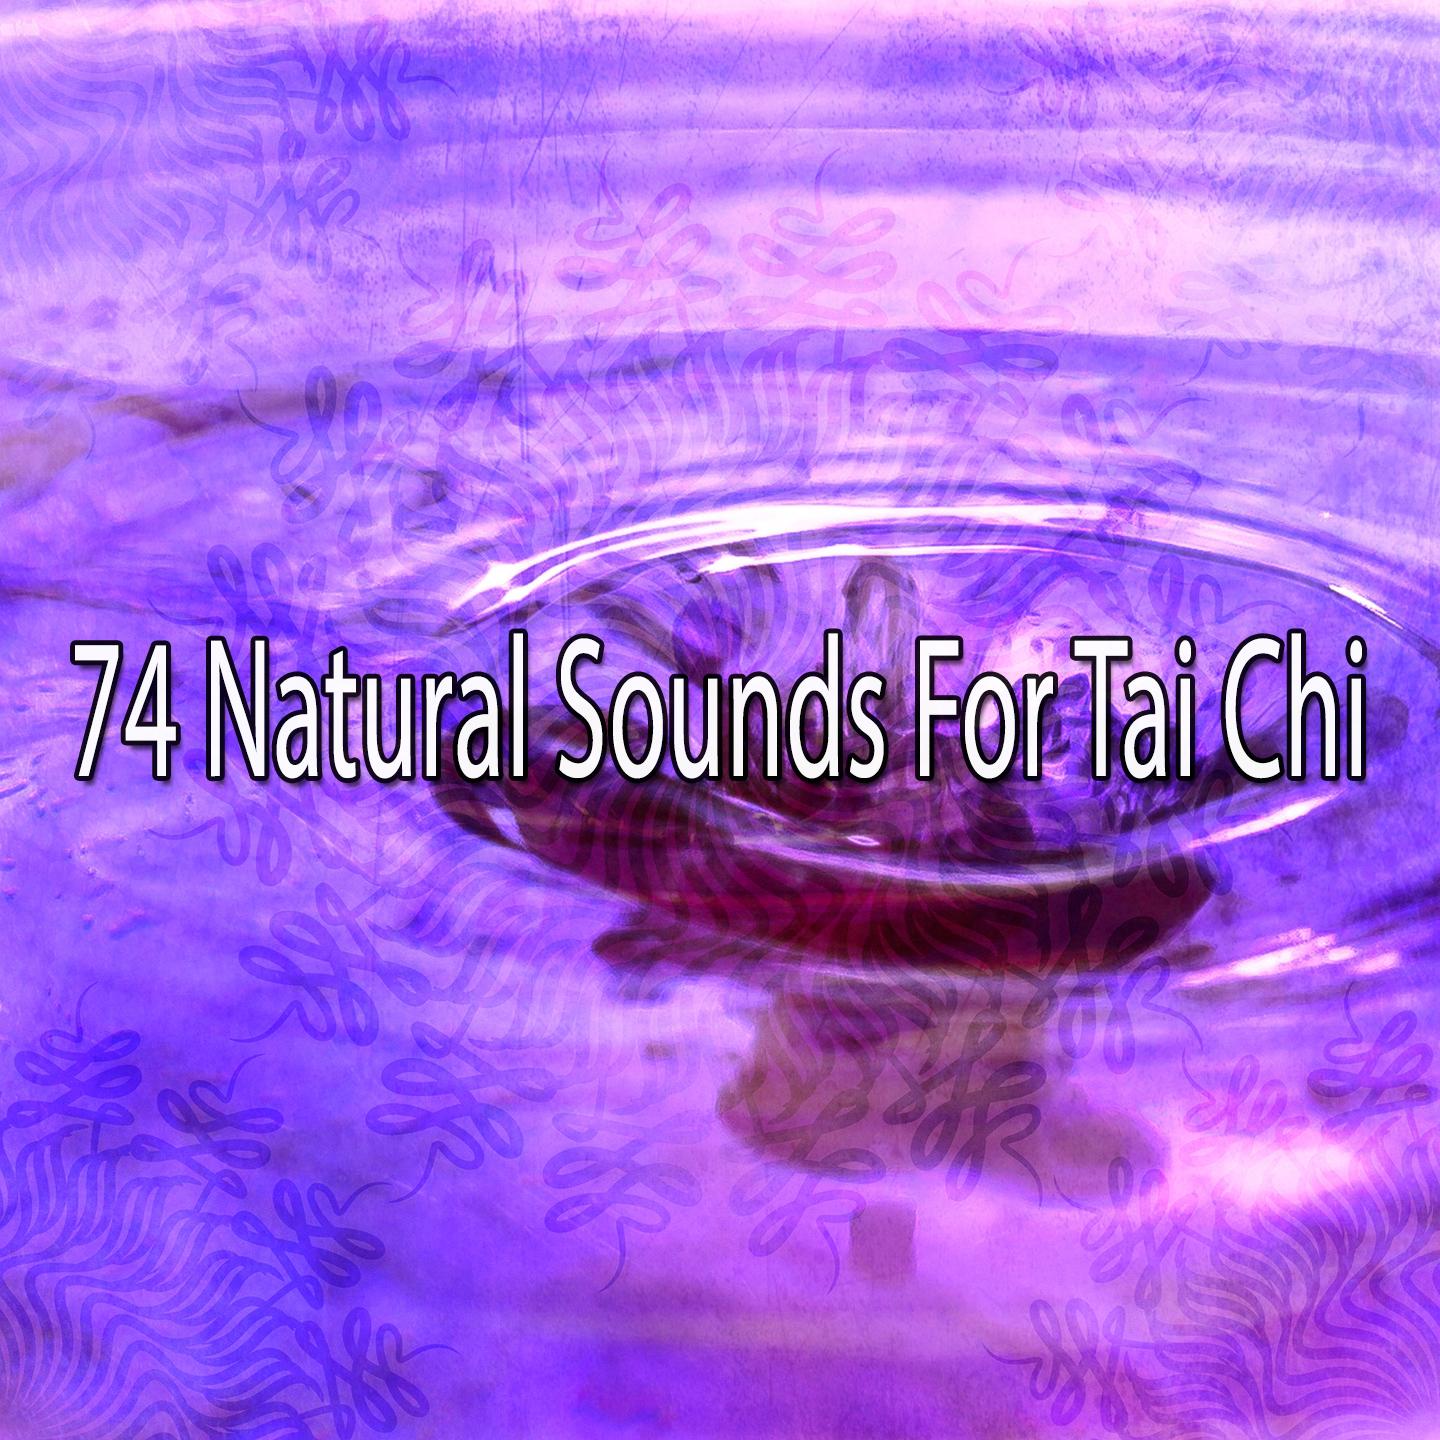 74 Natural Sounds for Tai Chi